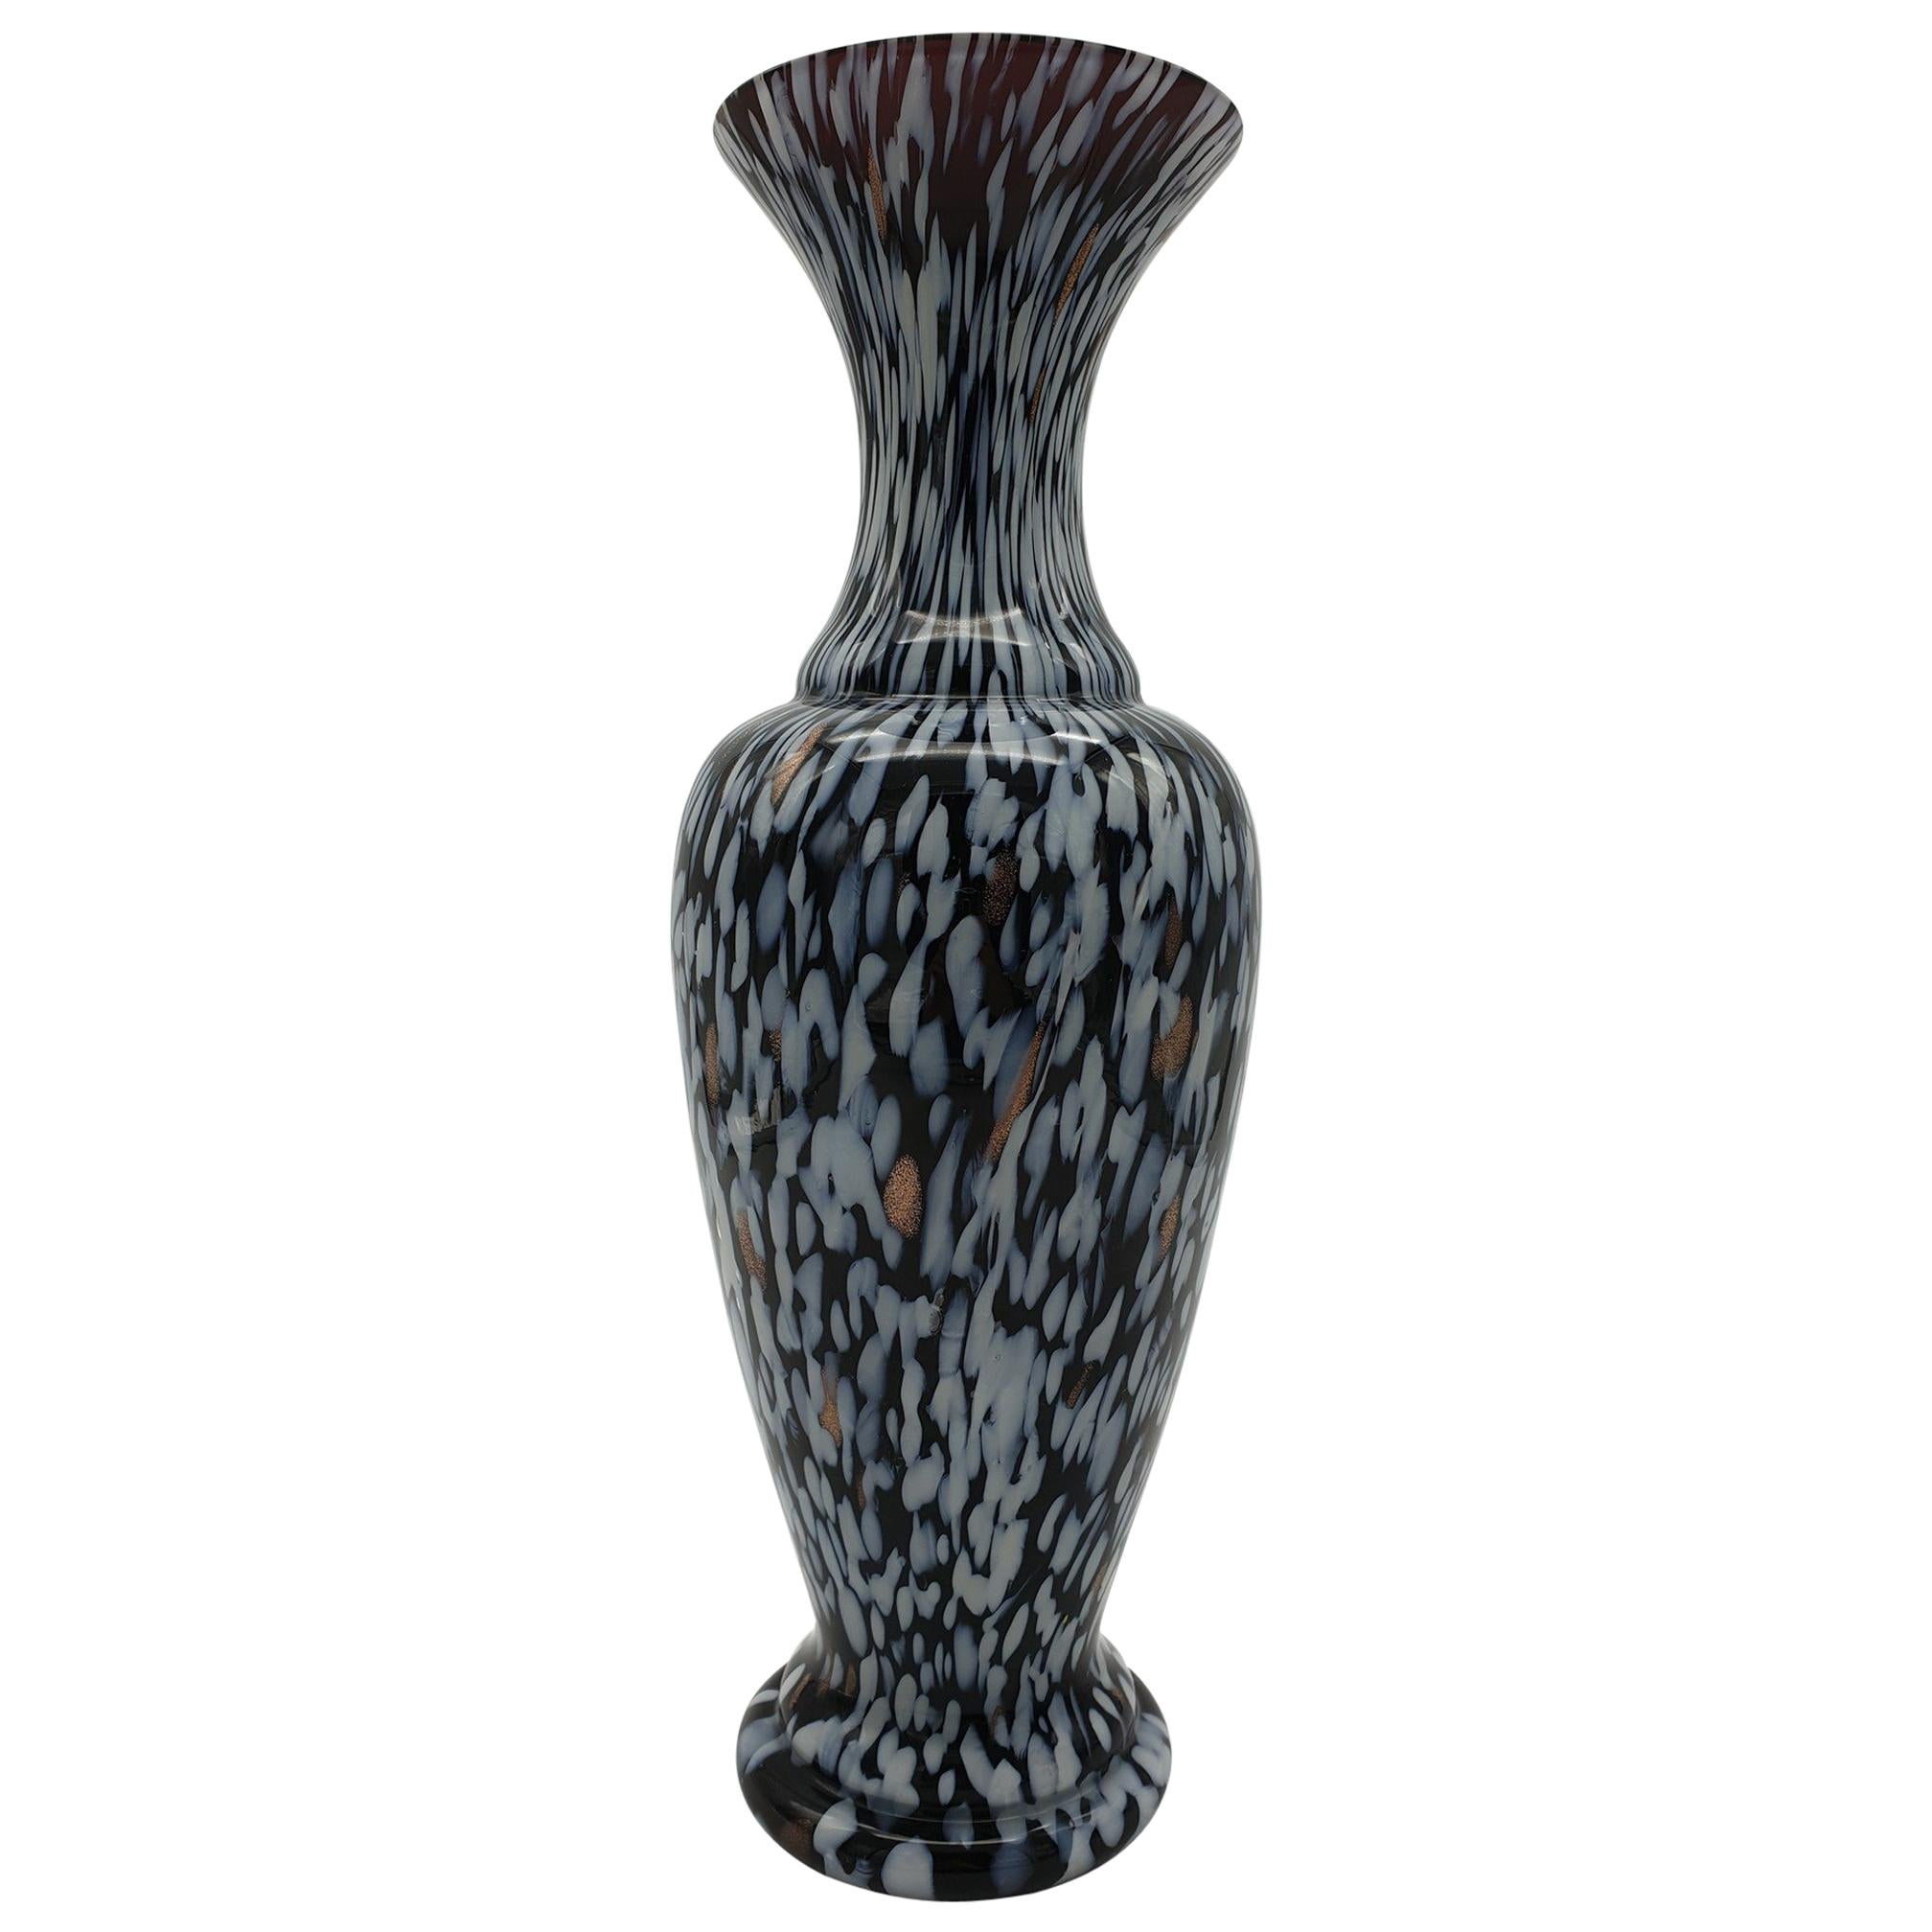 Vintage Murano Glass Vase in Black Color with White Spots by Cenedese, 1970s For Sale